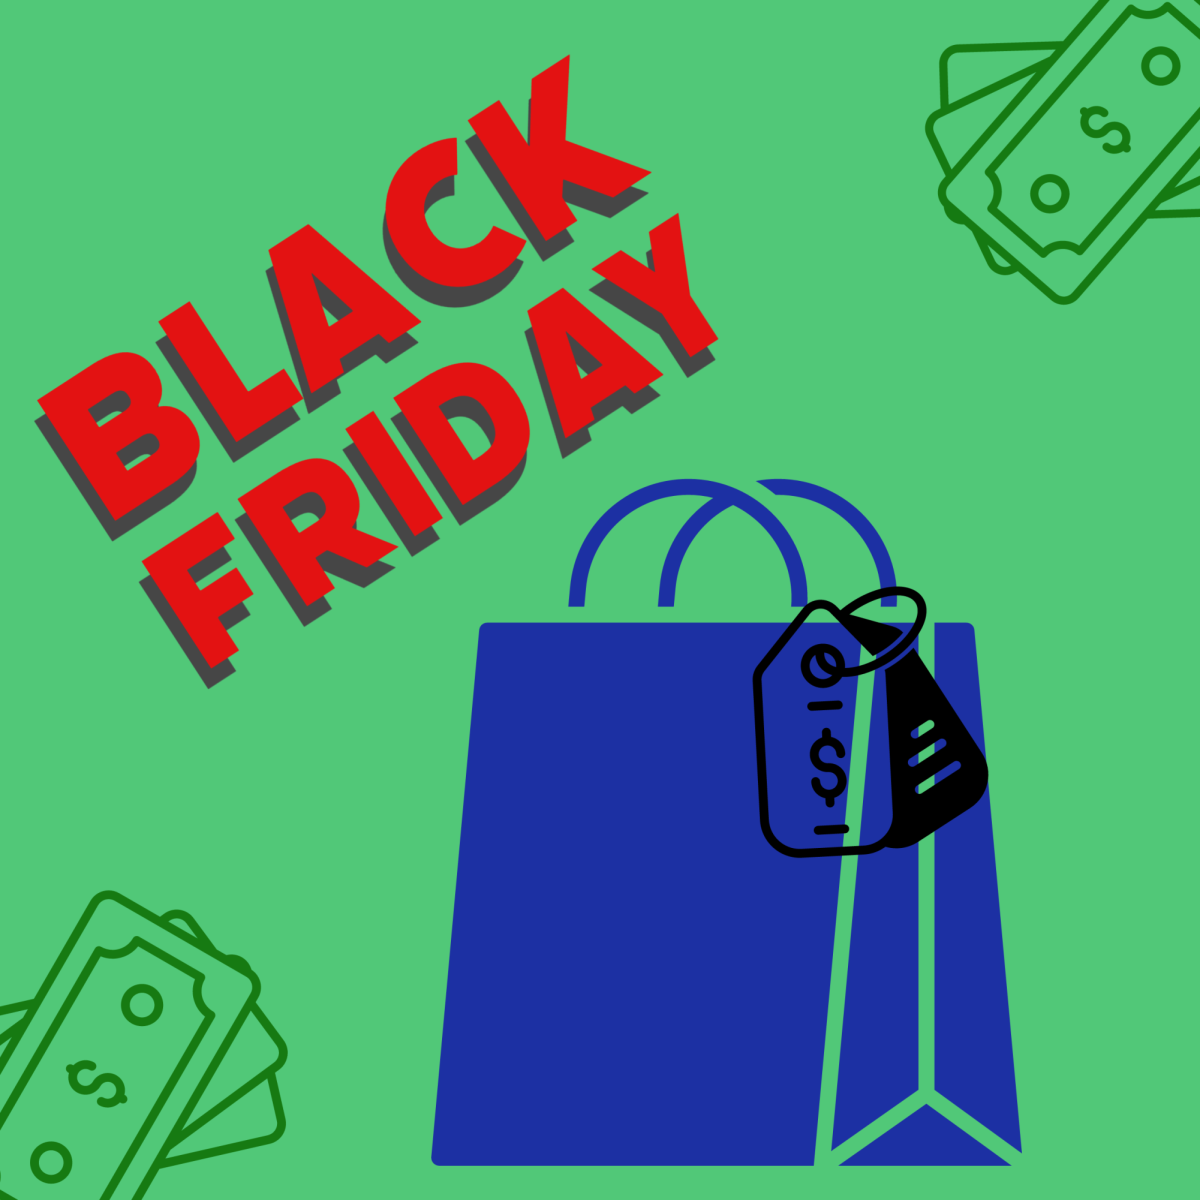 Pros and Cons of Intense Black Friday Shopping